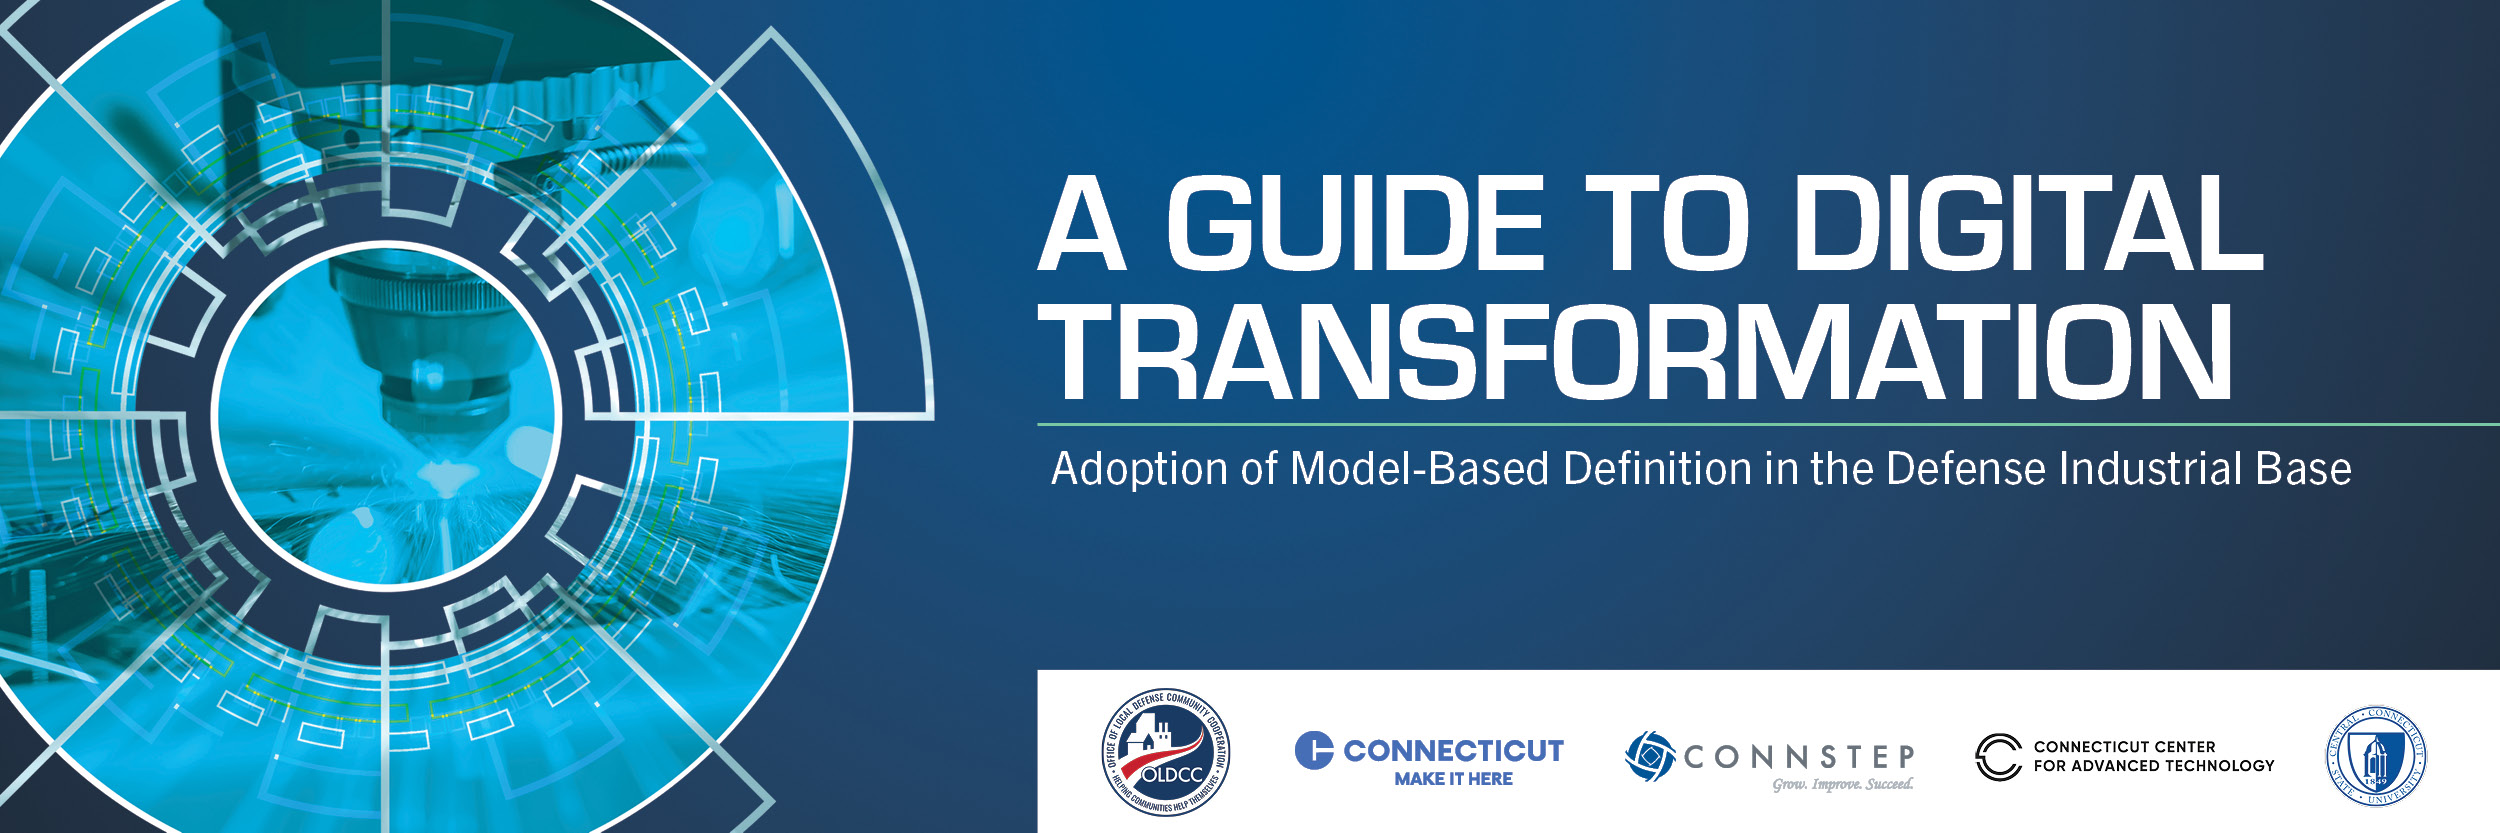 A Guide to Digital Transformation Hosted by Capital Community College